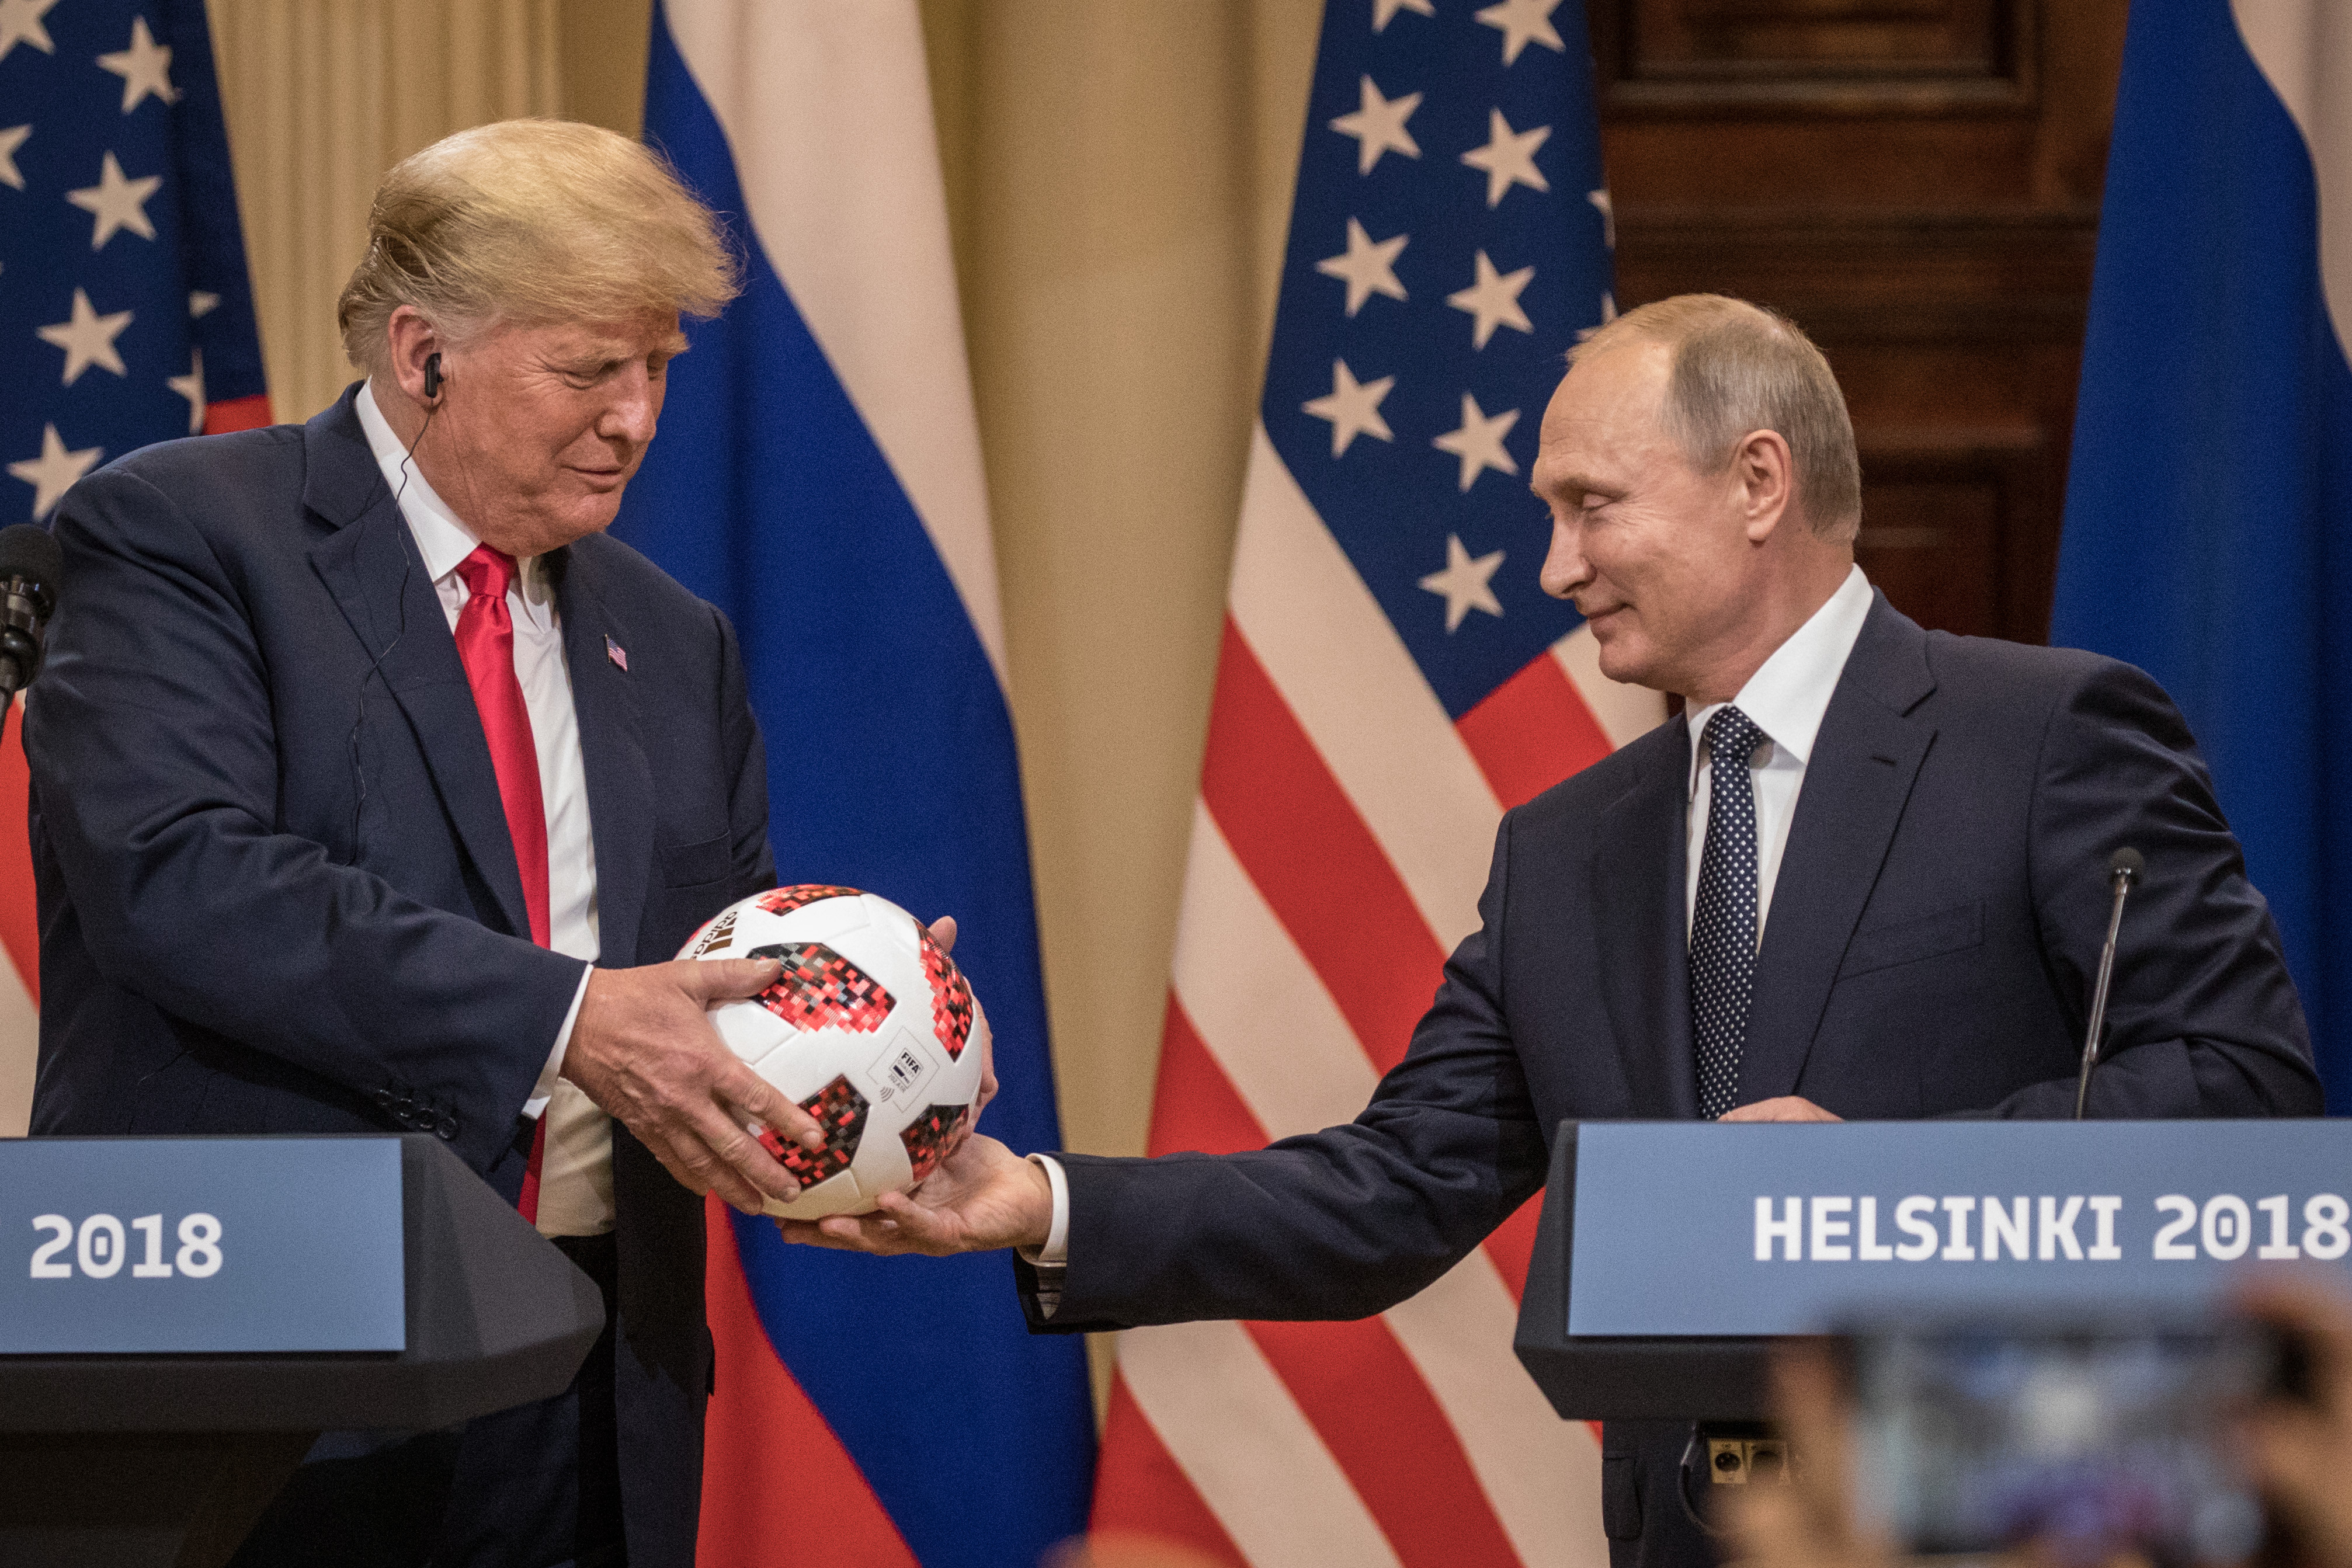 HELSINKI, FINLAND - JULY 16: Russian President Vladimir Putin hands U.S. President Donald Trump (L) a World Cup football during a joint press conference after their summit on July 16, 2018 in Helsinki, Finland. The two leaders met one-on-one and discussed a range of issues including the 2016 U.S Election collusion. (Photo by Chris McGrath/Getty Images)